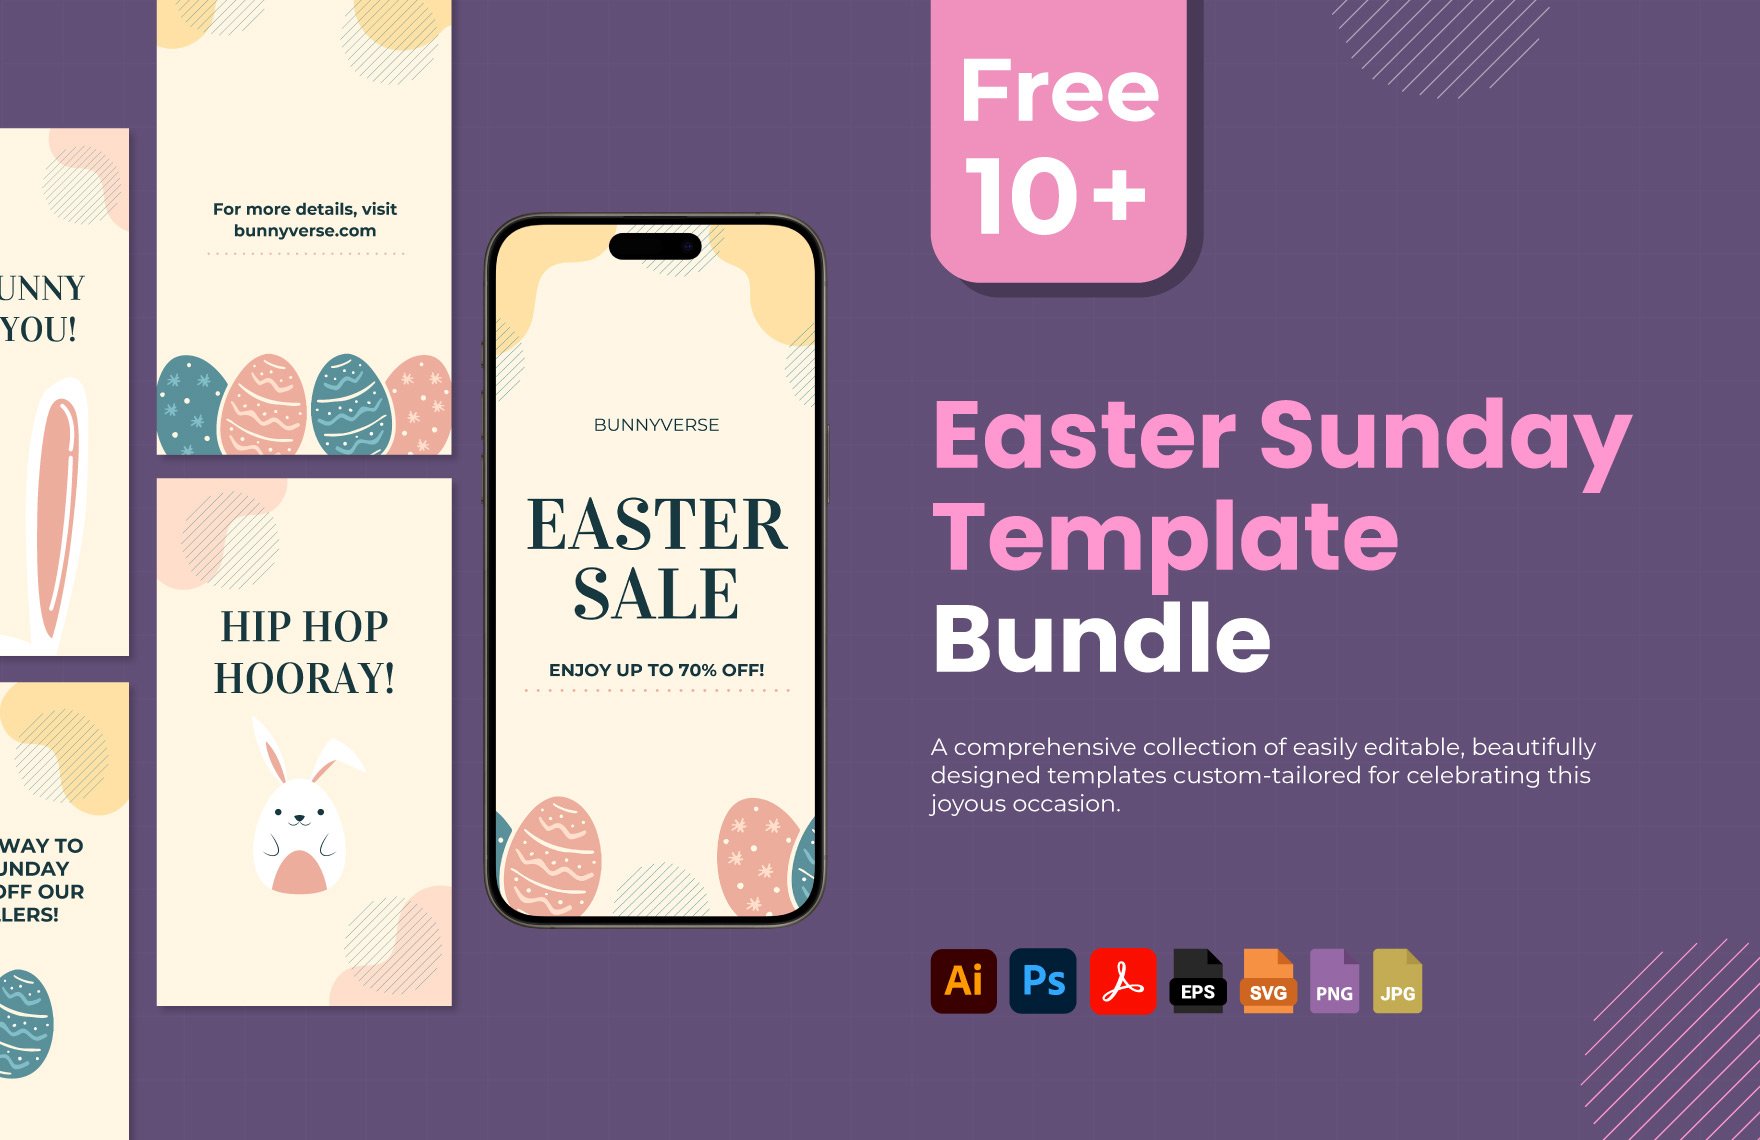 Free 10+ Easter Sunday Template Bundle